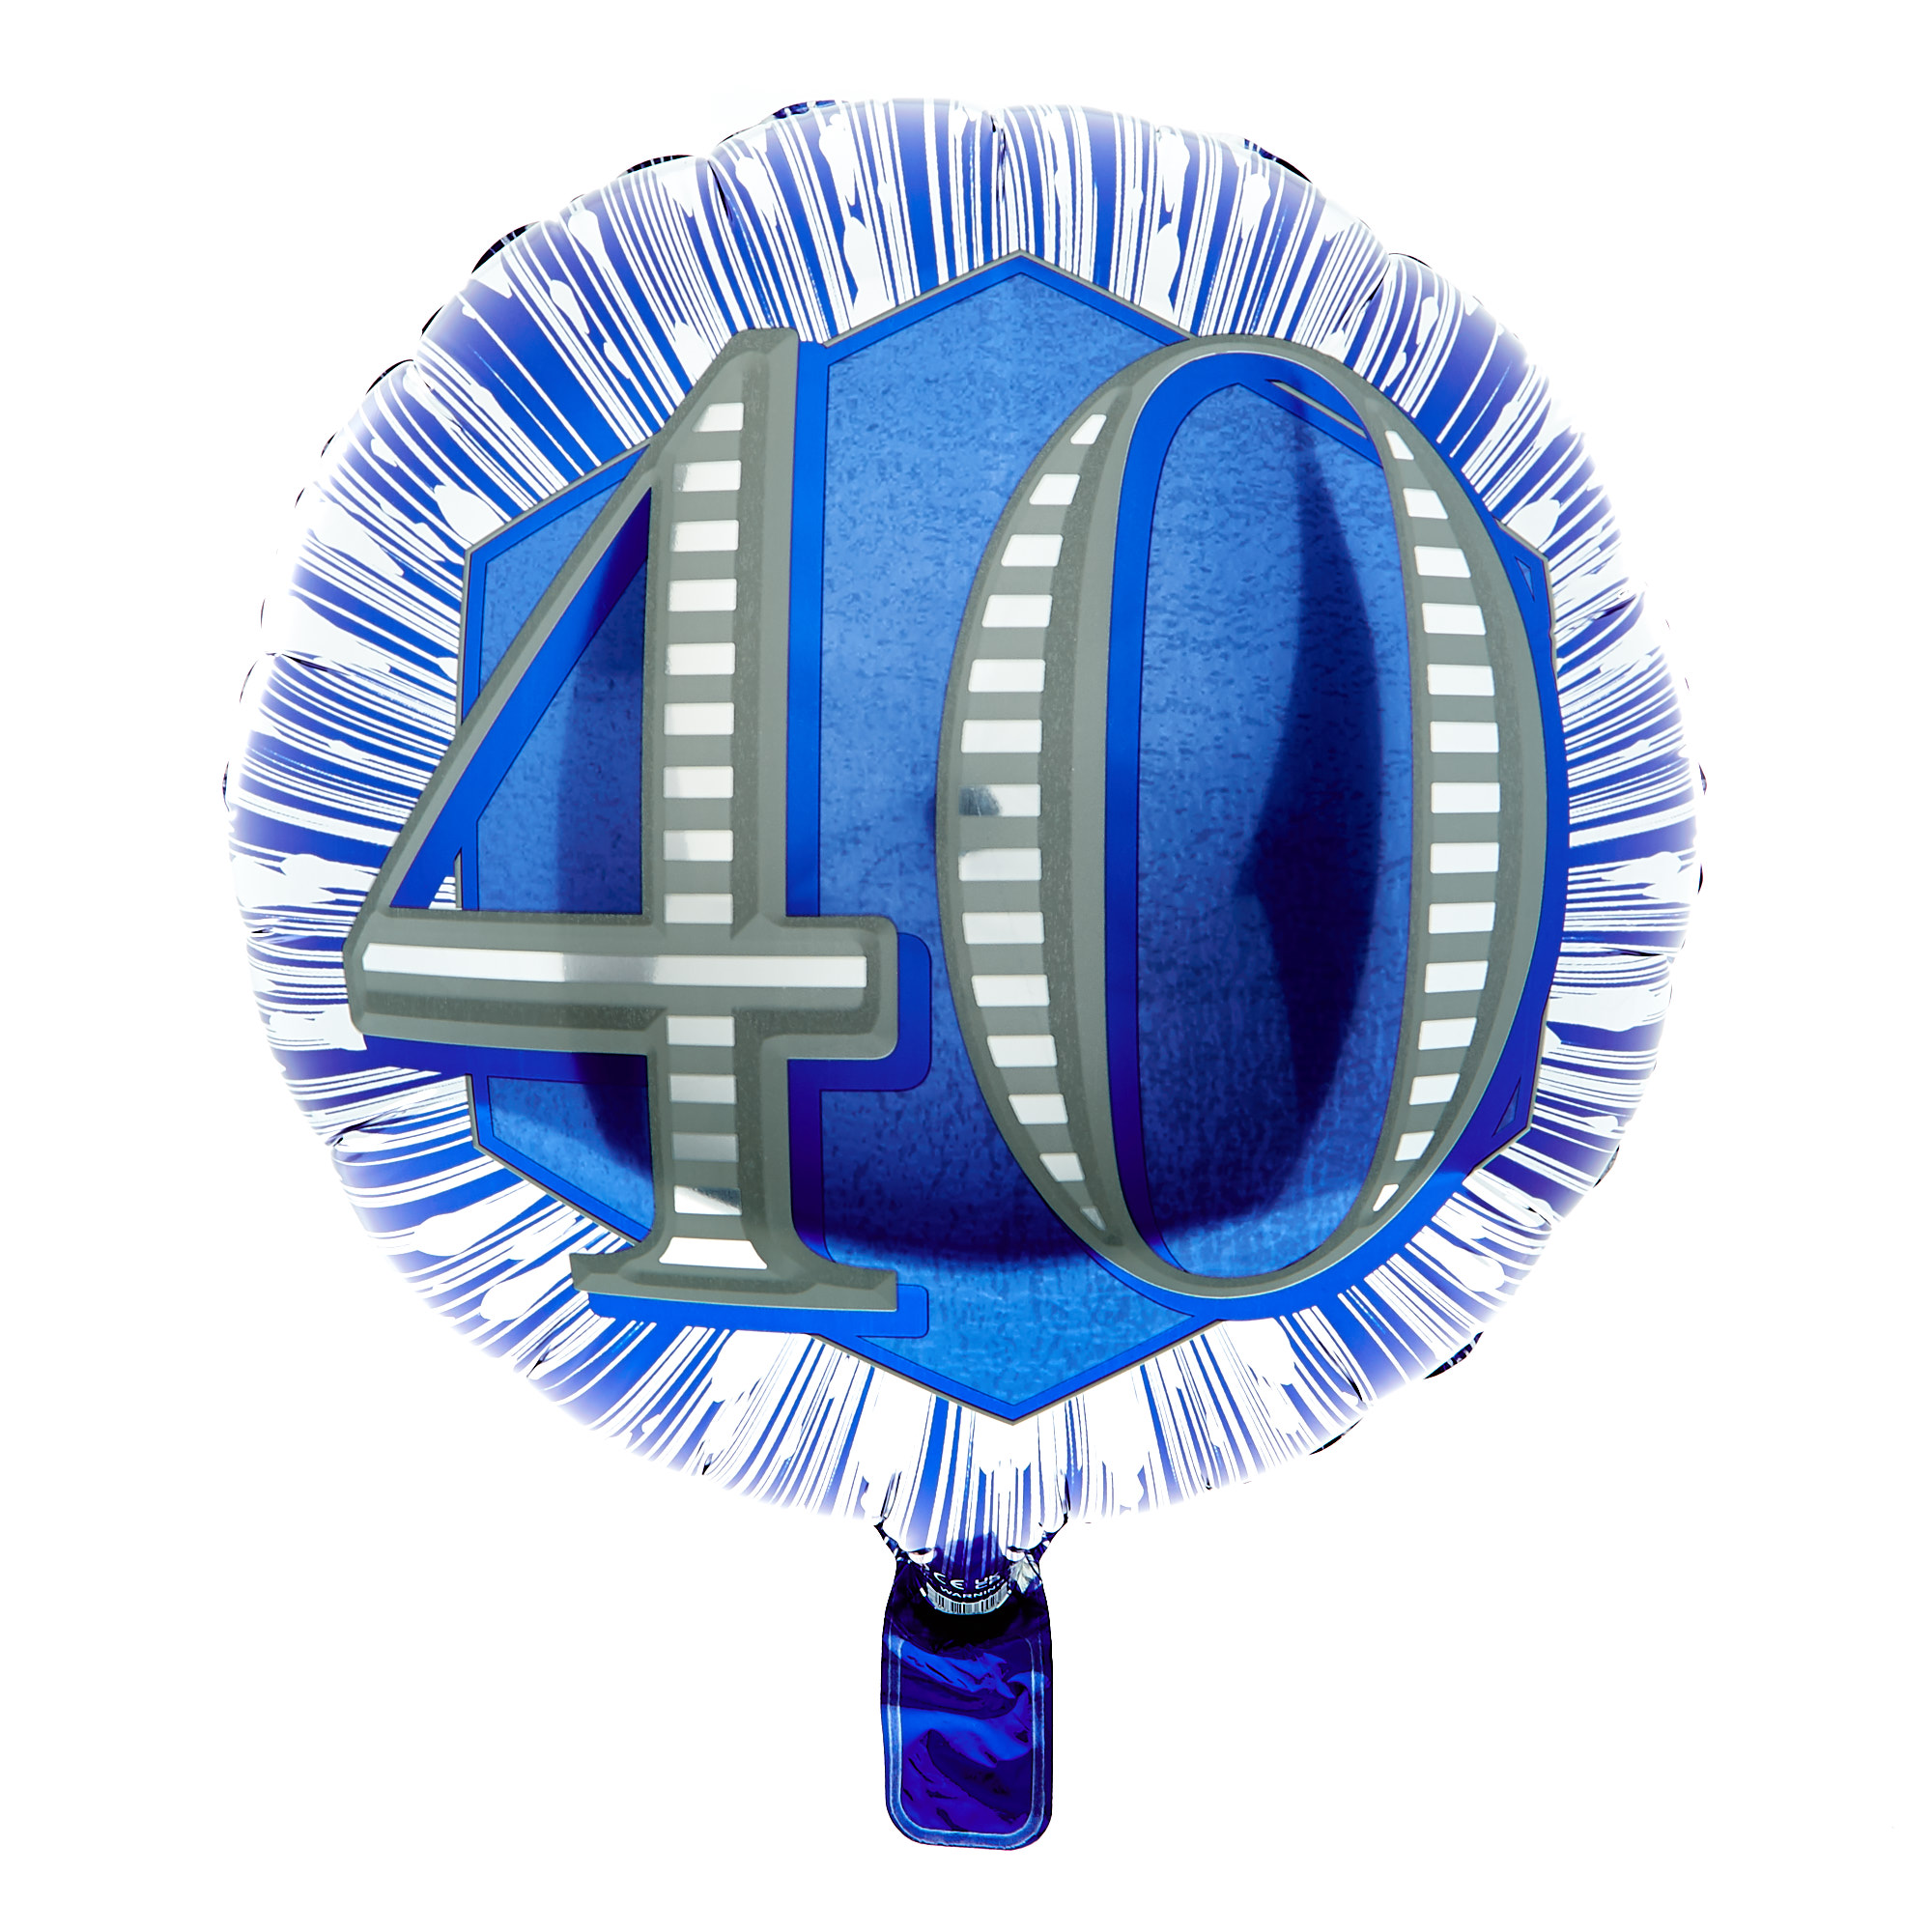 Blue & Silver 40th Birthday Balloon Bouquet - DELIVERED INFLATED!